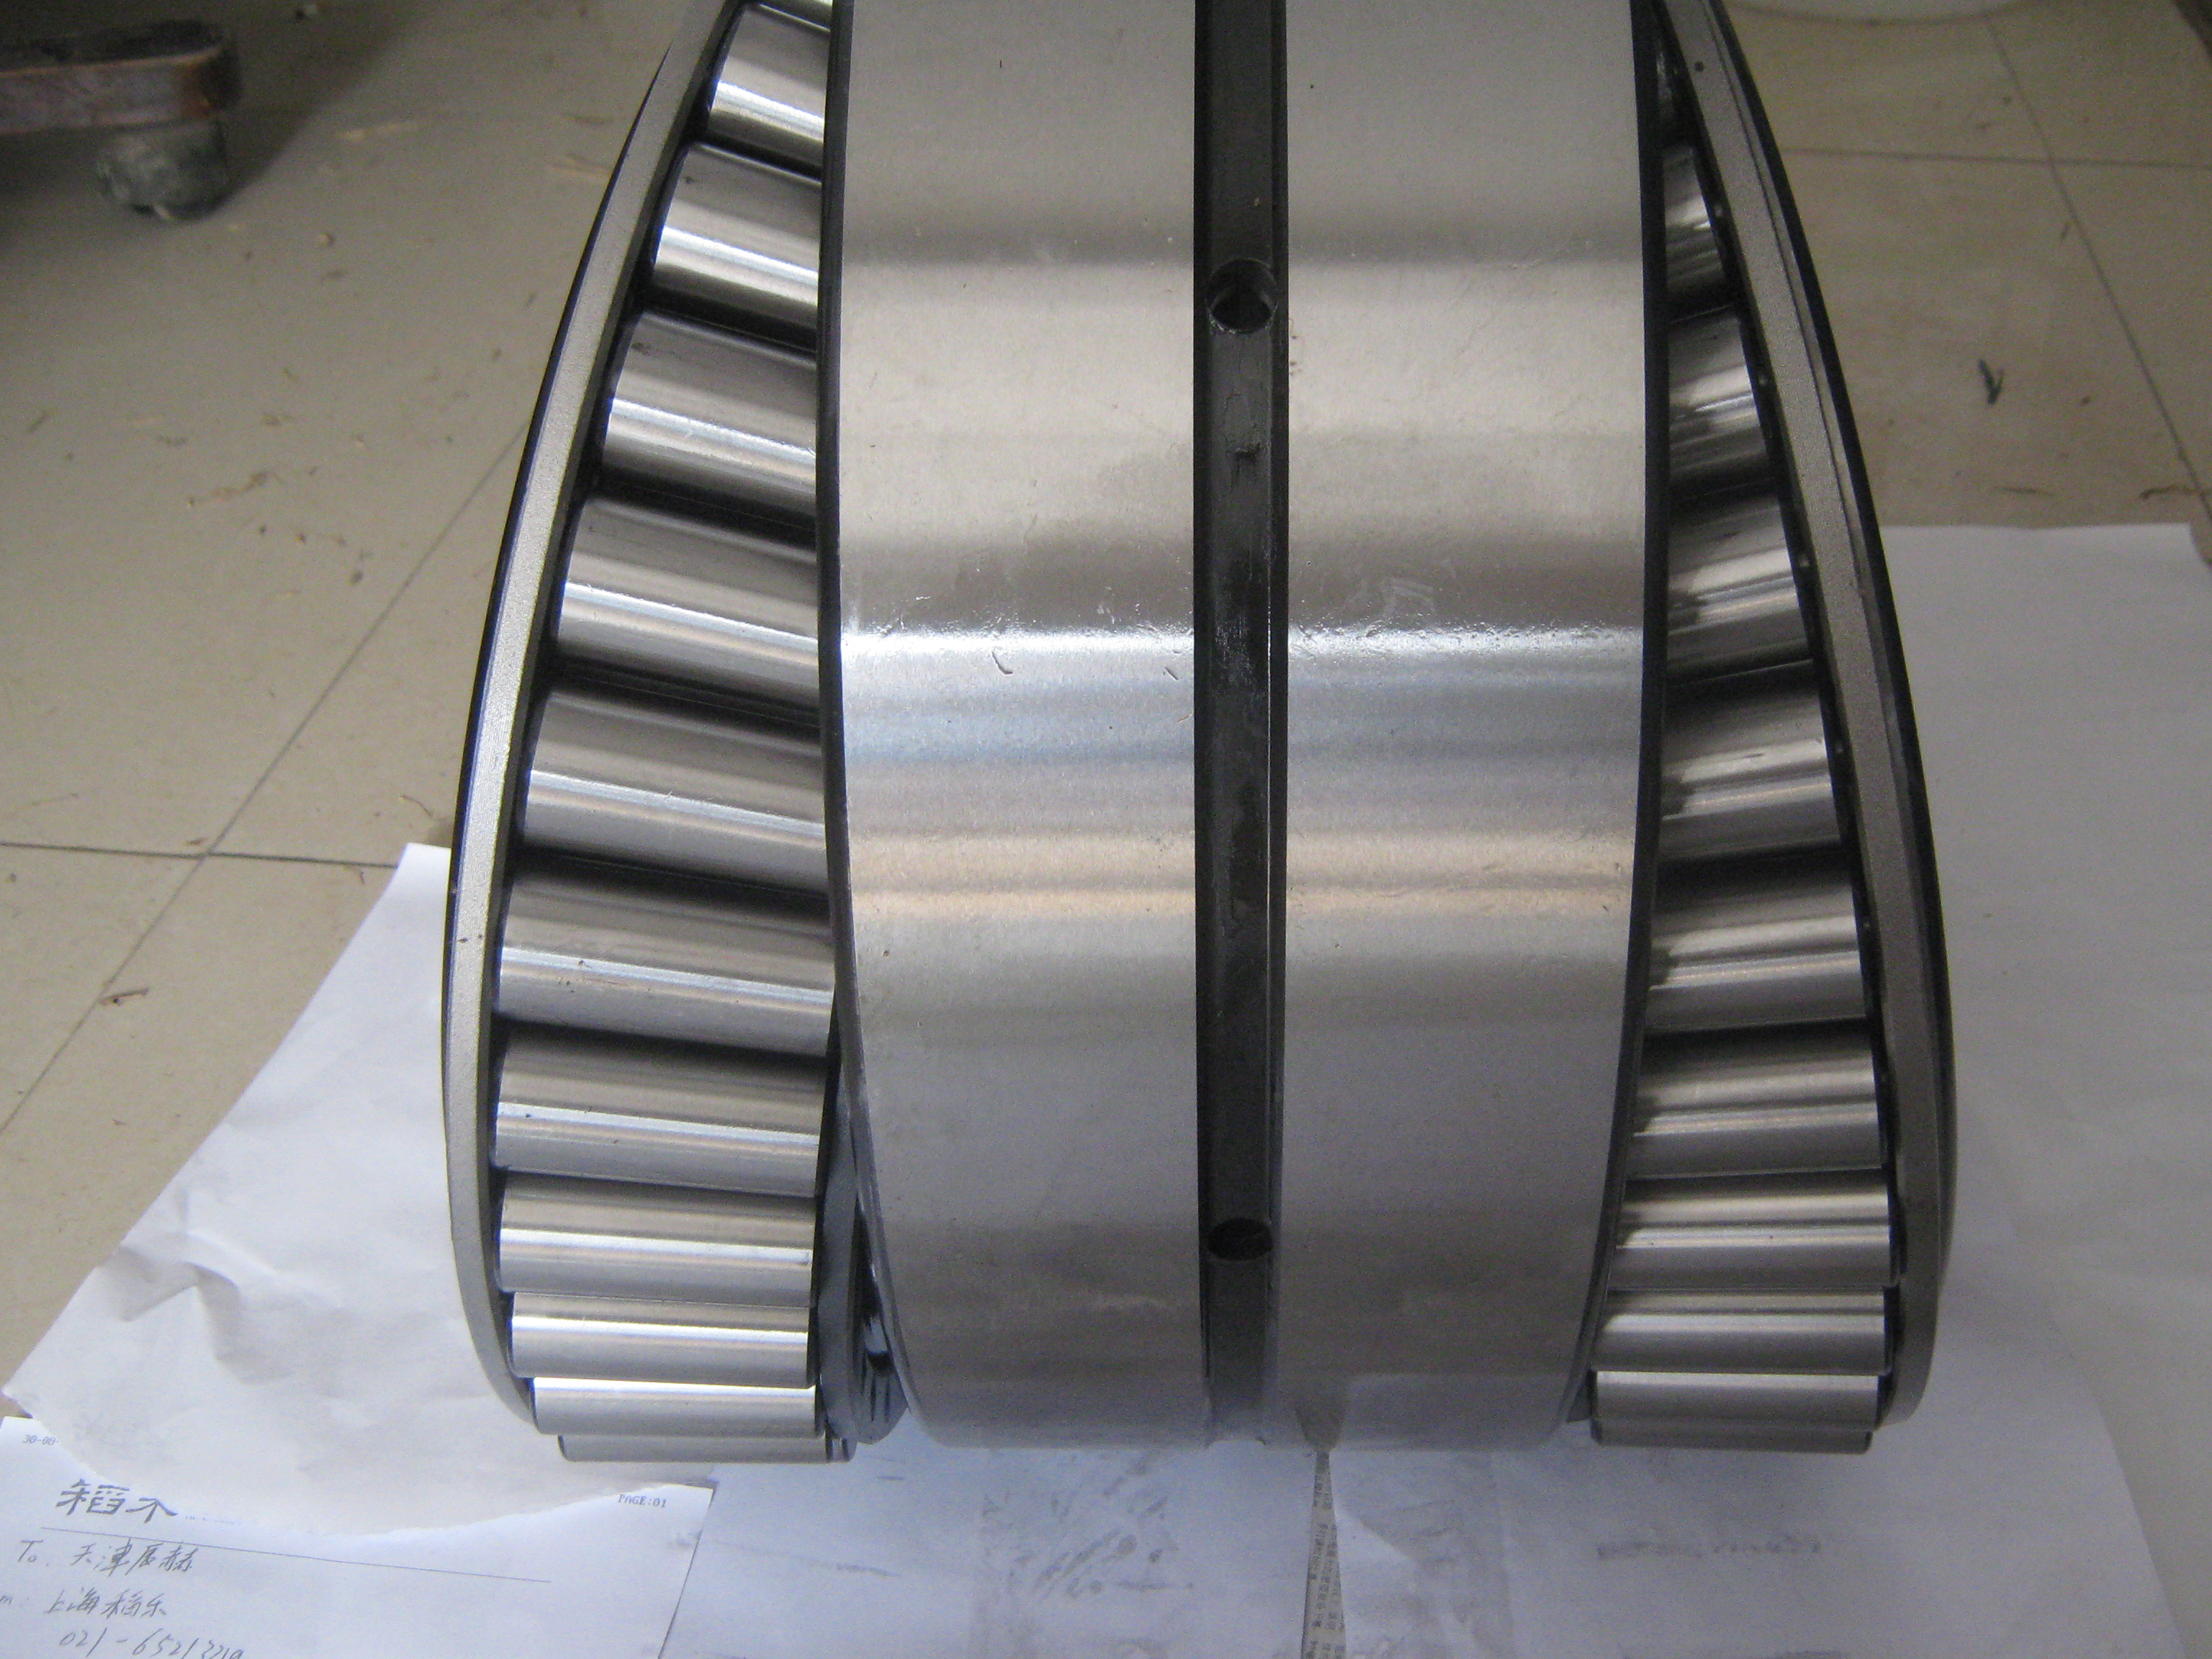 Stainless Single Row Roller Bearing 30205 30206 30207 With Steel Plate Cage